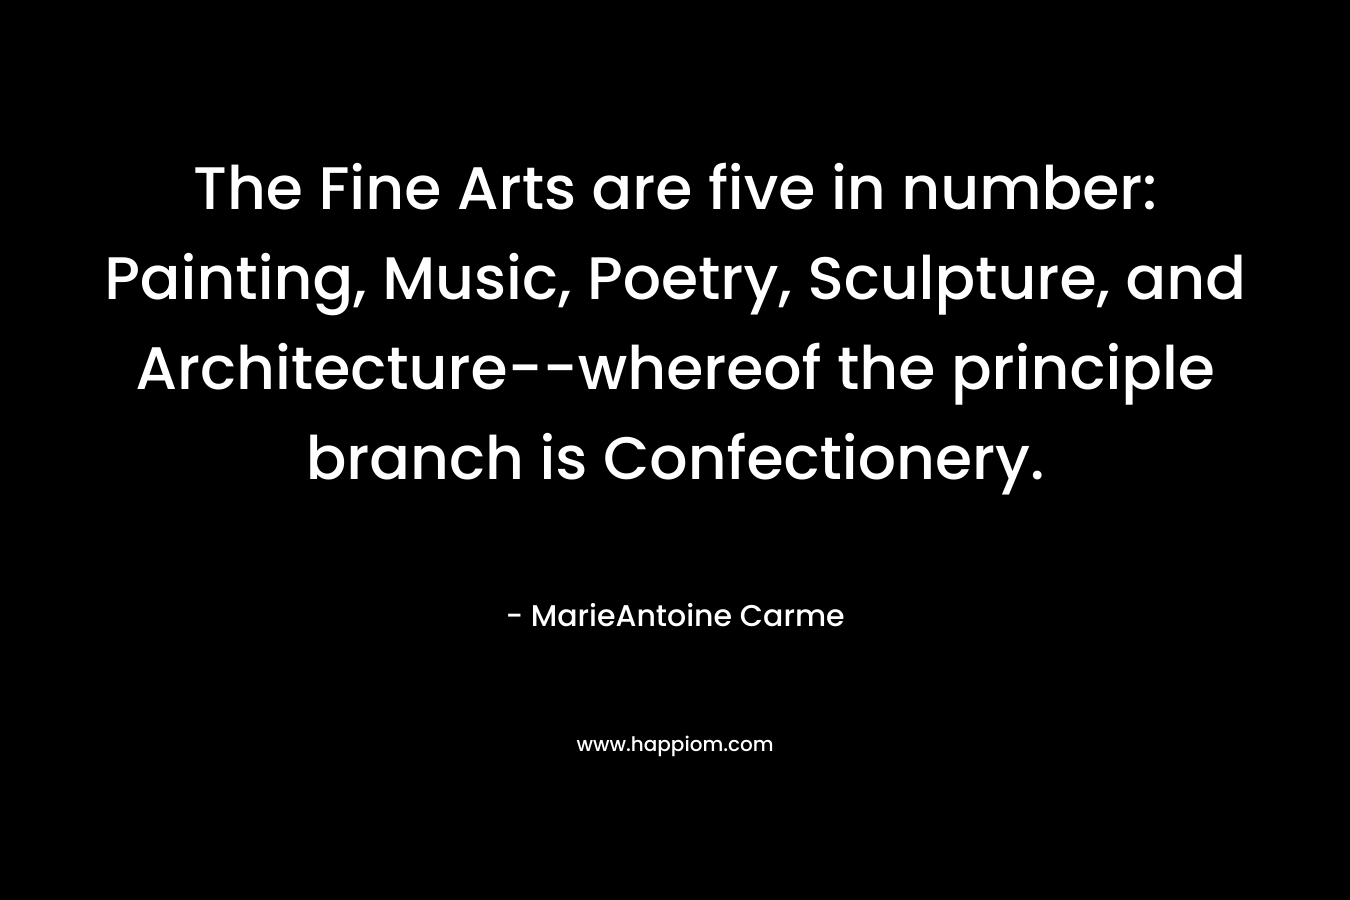 The Fine Arts are five in number: Painting, Music, Poetry, Sculpture, and Architecture--whereof the principle branch is Confectionery.